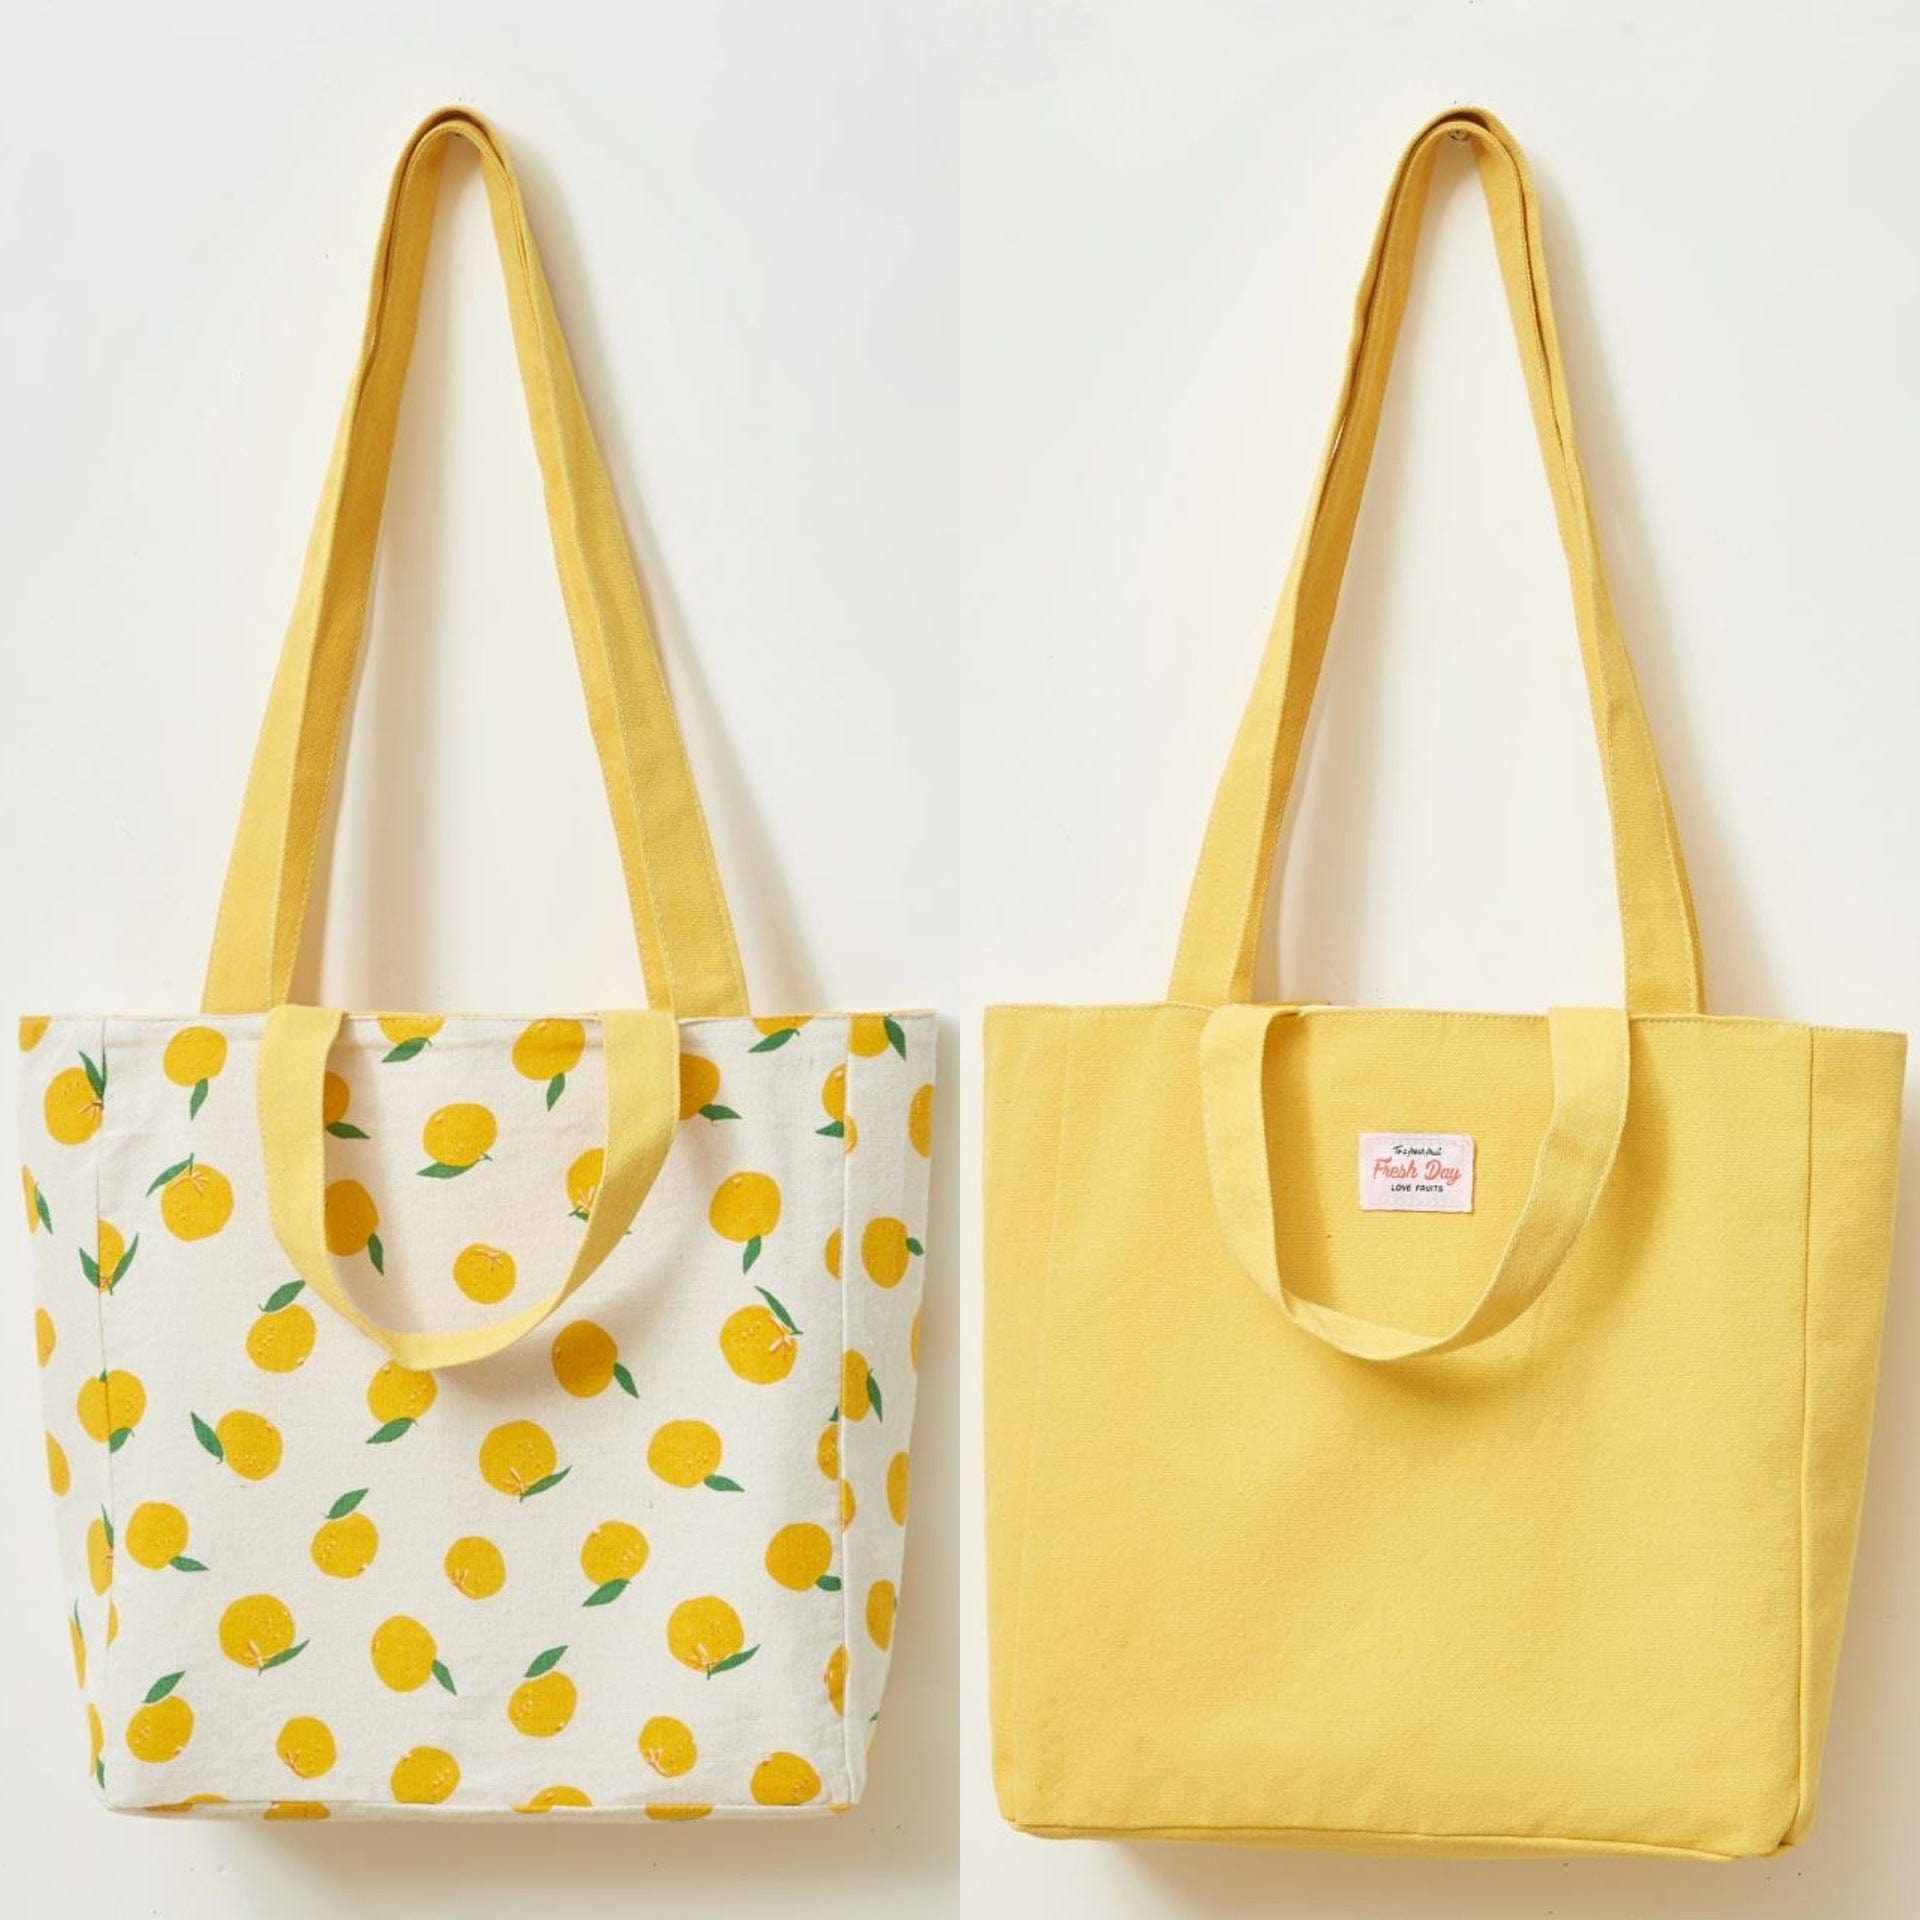 Tote Bag Yellow/Oranges Tote Bag - Double Handle Two-Sided Fruit Canvas Shopping Bags